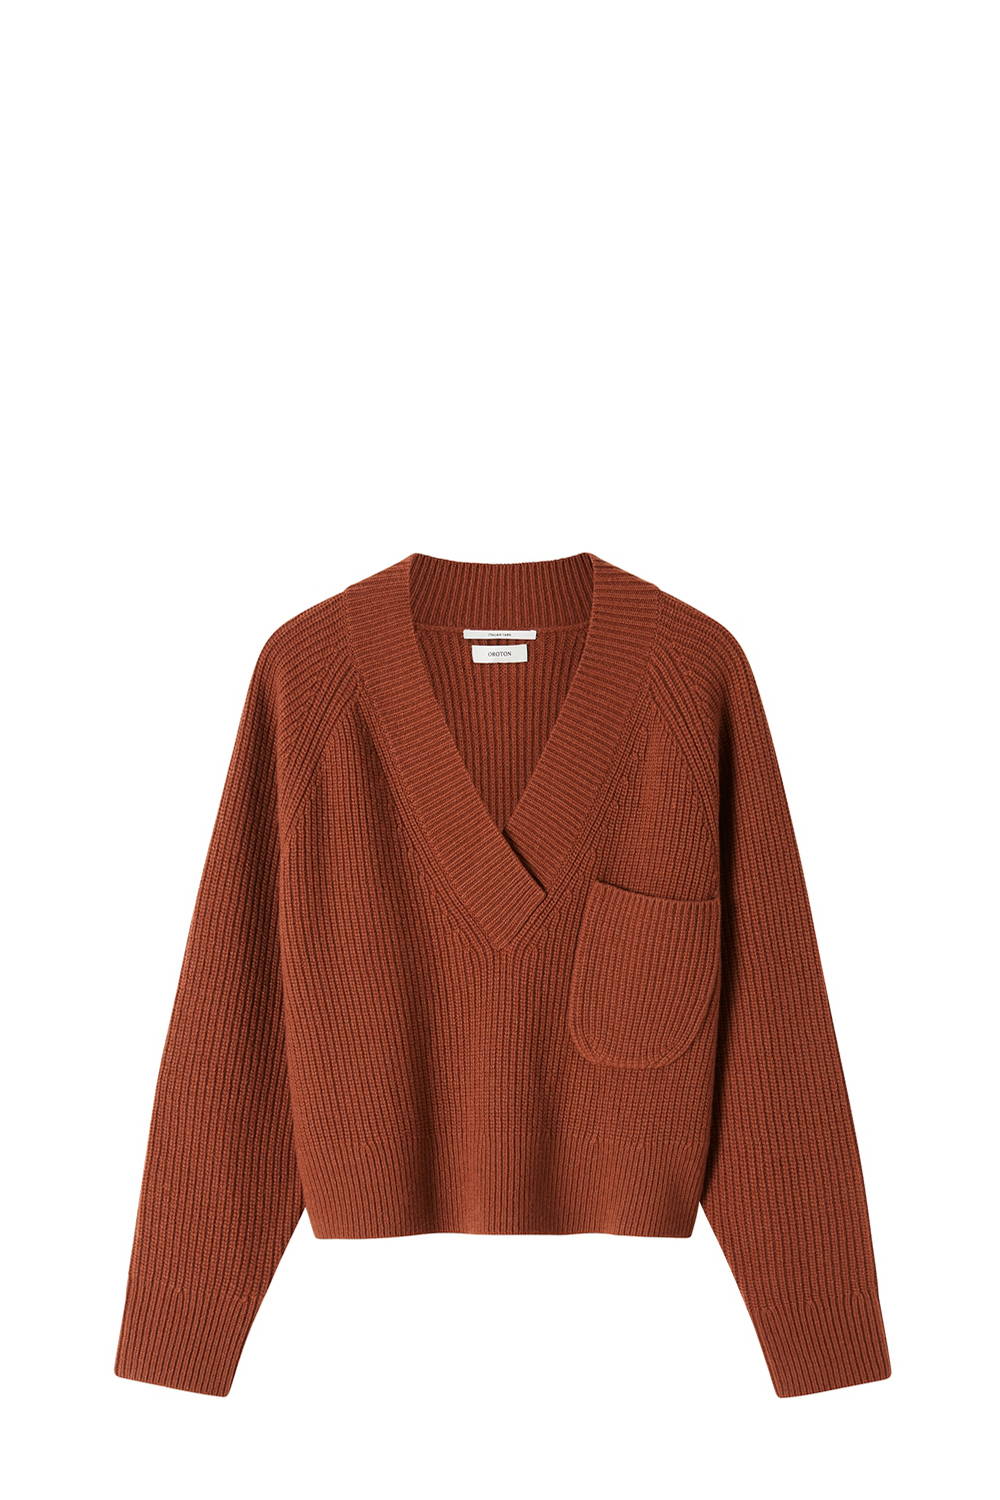 Oroton Wool V Neck Knit Brown